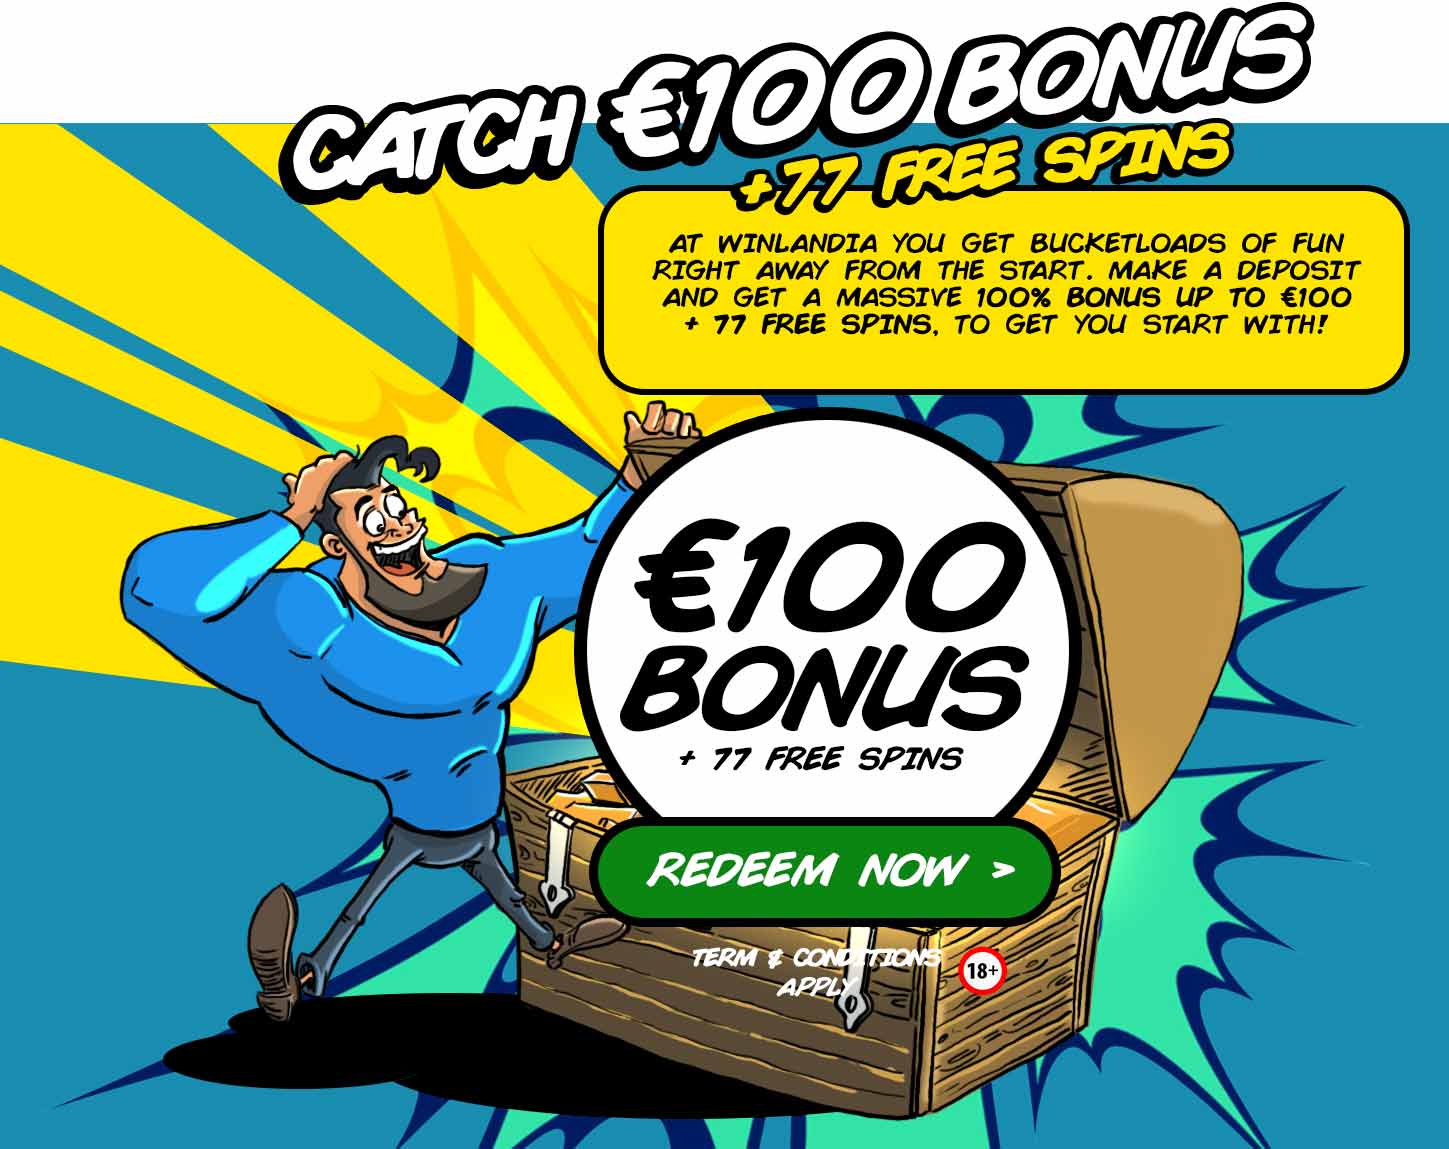 Catch €100 Bonus + 77 Free Spins. At Winlandia you get bucketloads of fun right a way from the start. Make a deposit and get a massive 100% bonus up to €100 + 77 Free Spins, to get you started with!